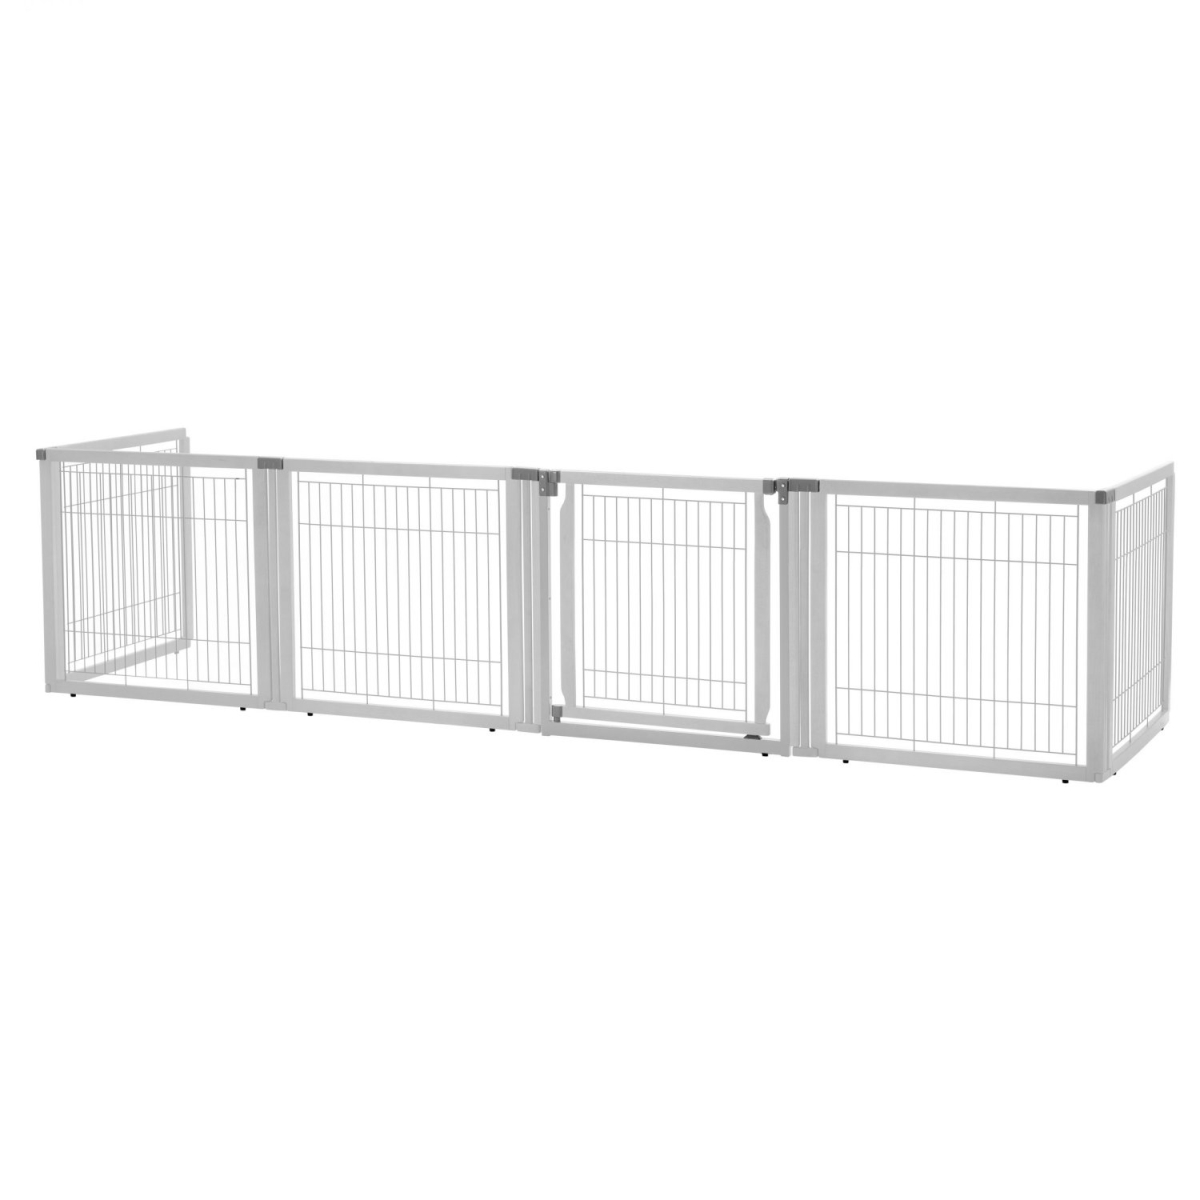 Picture of Richell 94959 Convertible Elite 6 Panel Pet Gate, Origami White